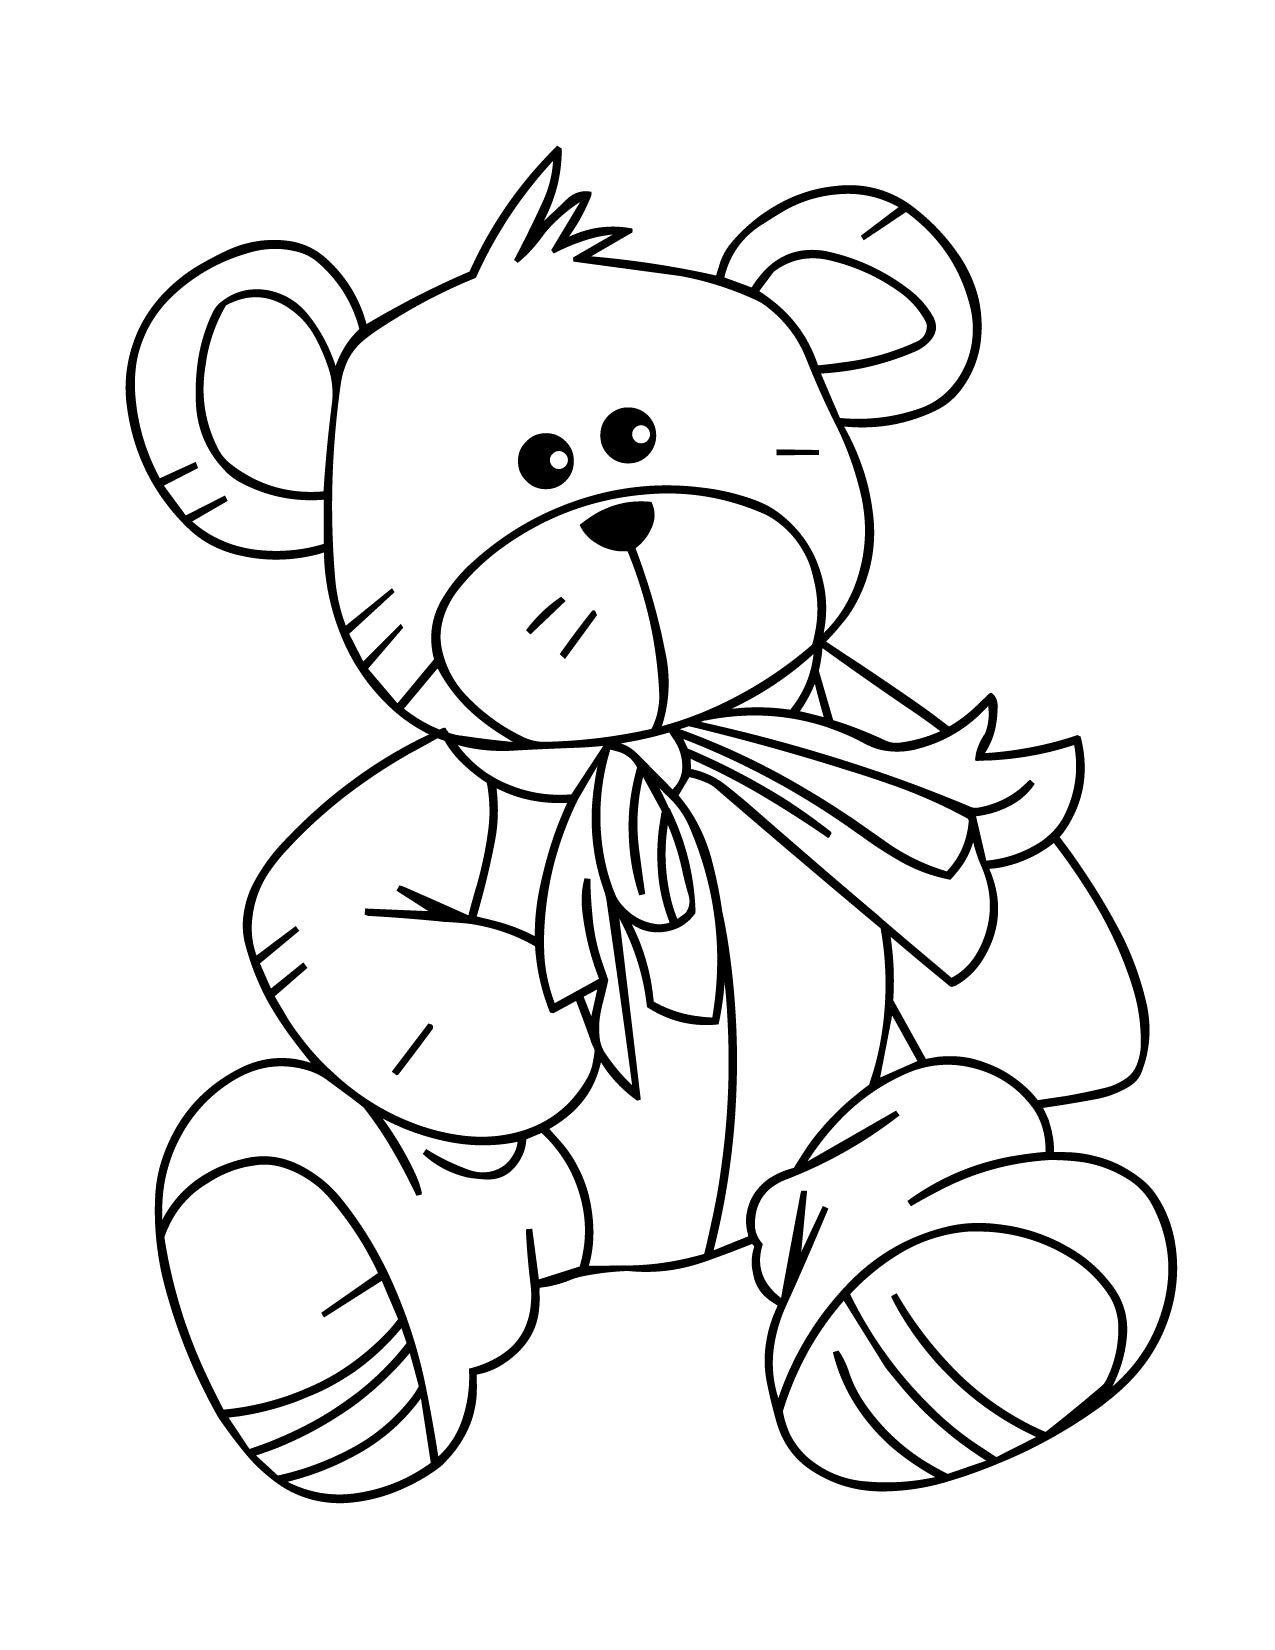 Valentine Teddy Bear Coloring Pages Coloring Teddy Bear Coloring Pages To Print Sheet Elsa Free For